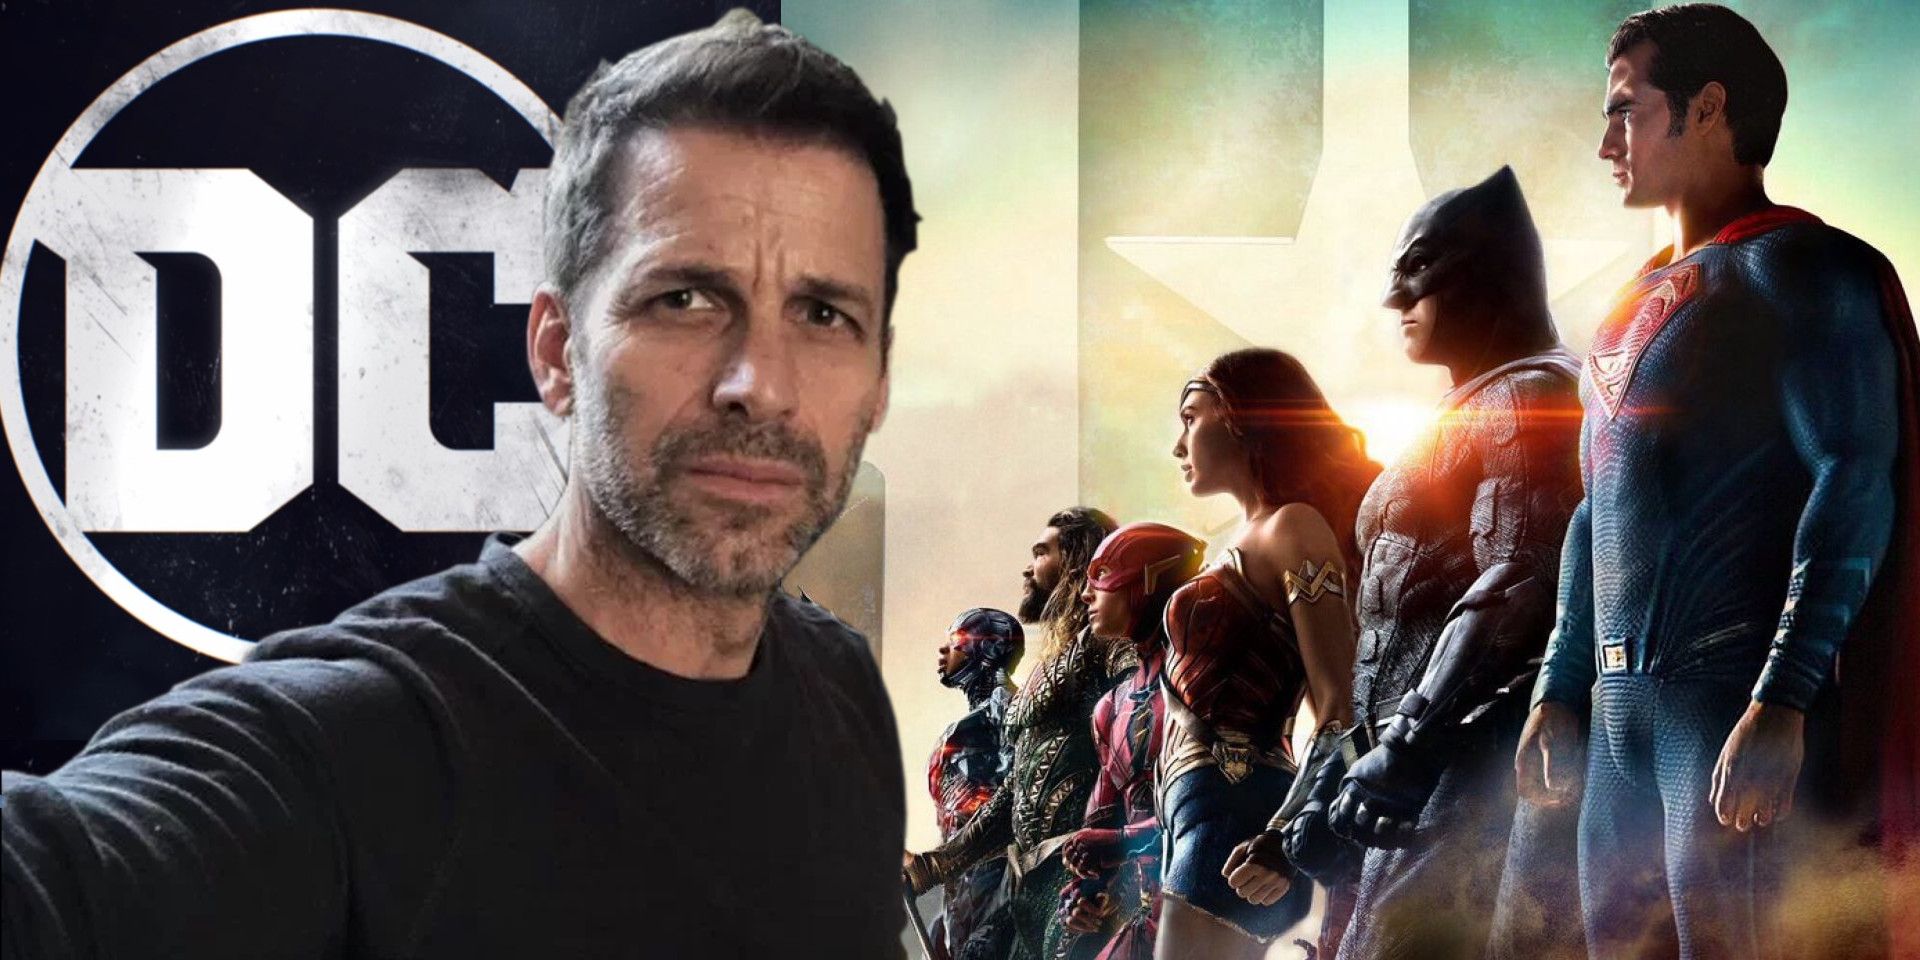 How Zack Snyders Justice League Sequels Were Different From His Other DC Films